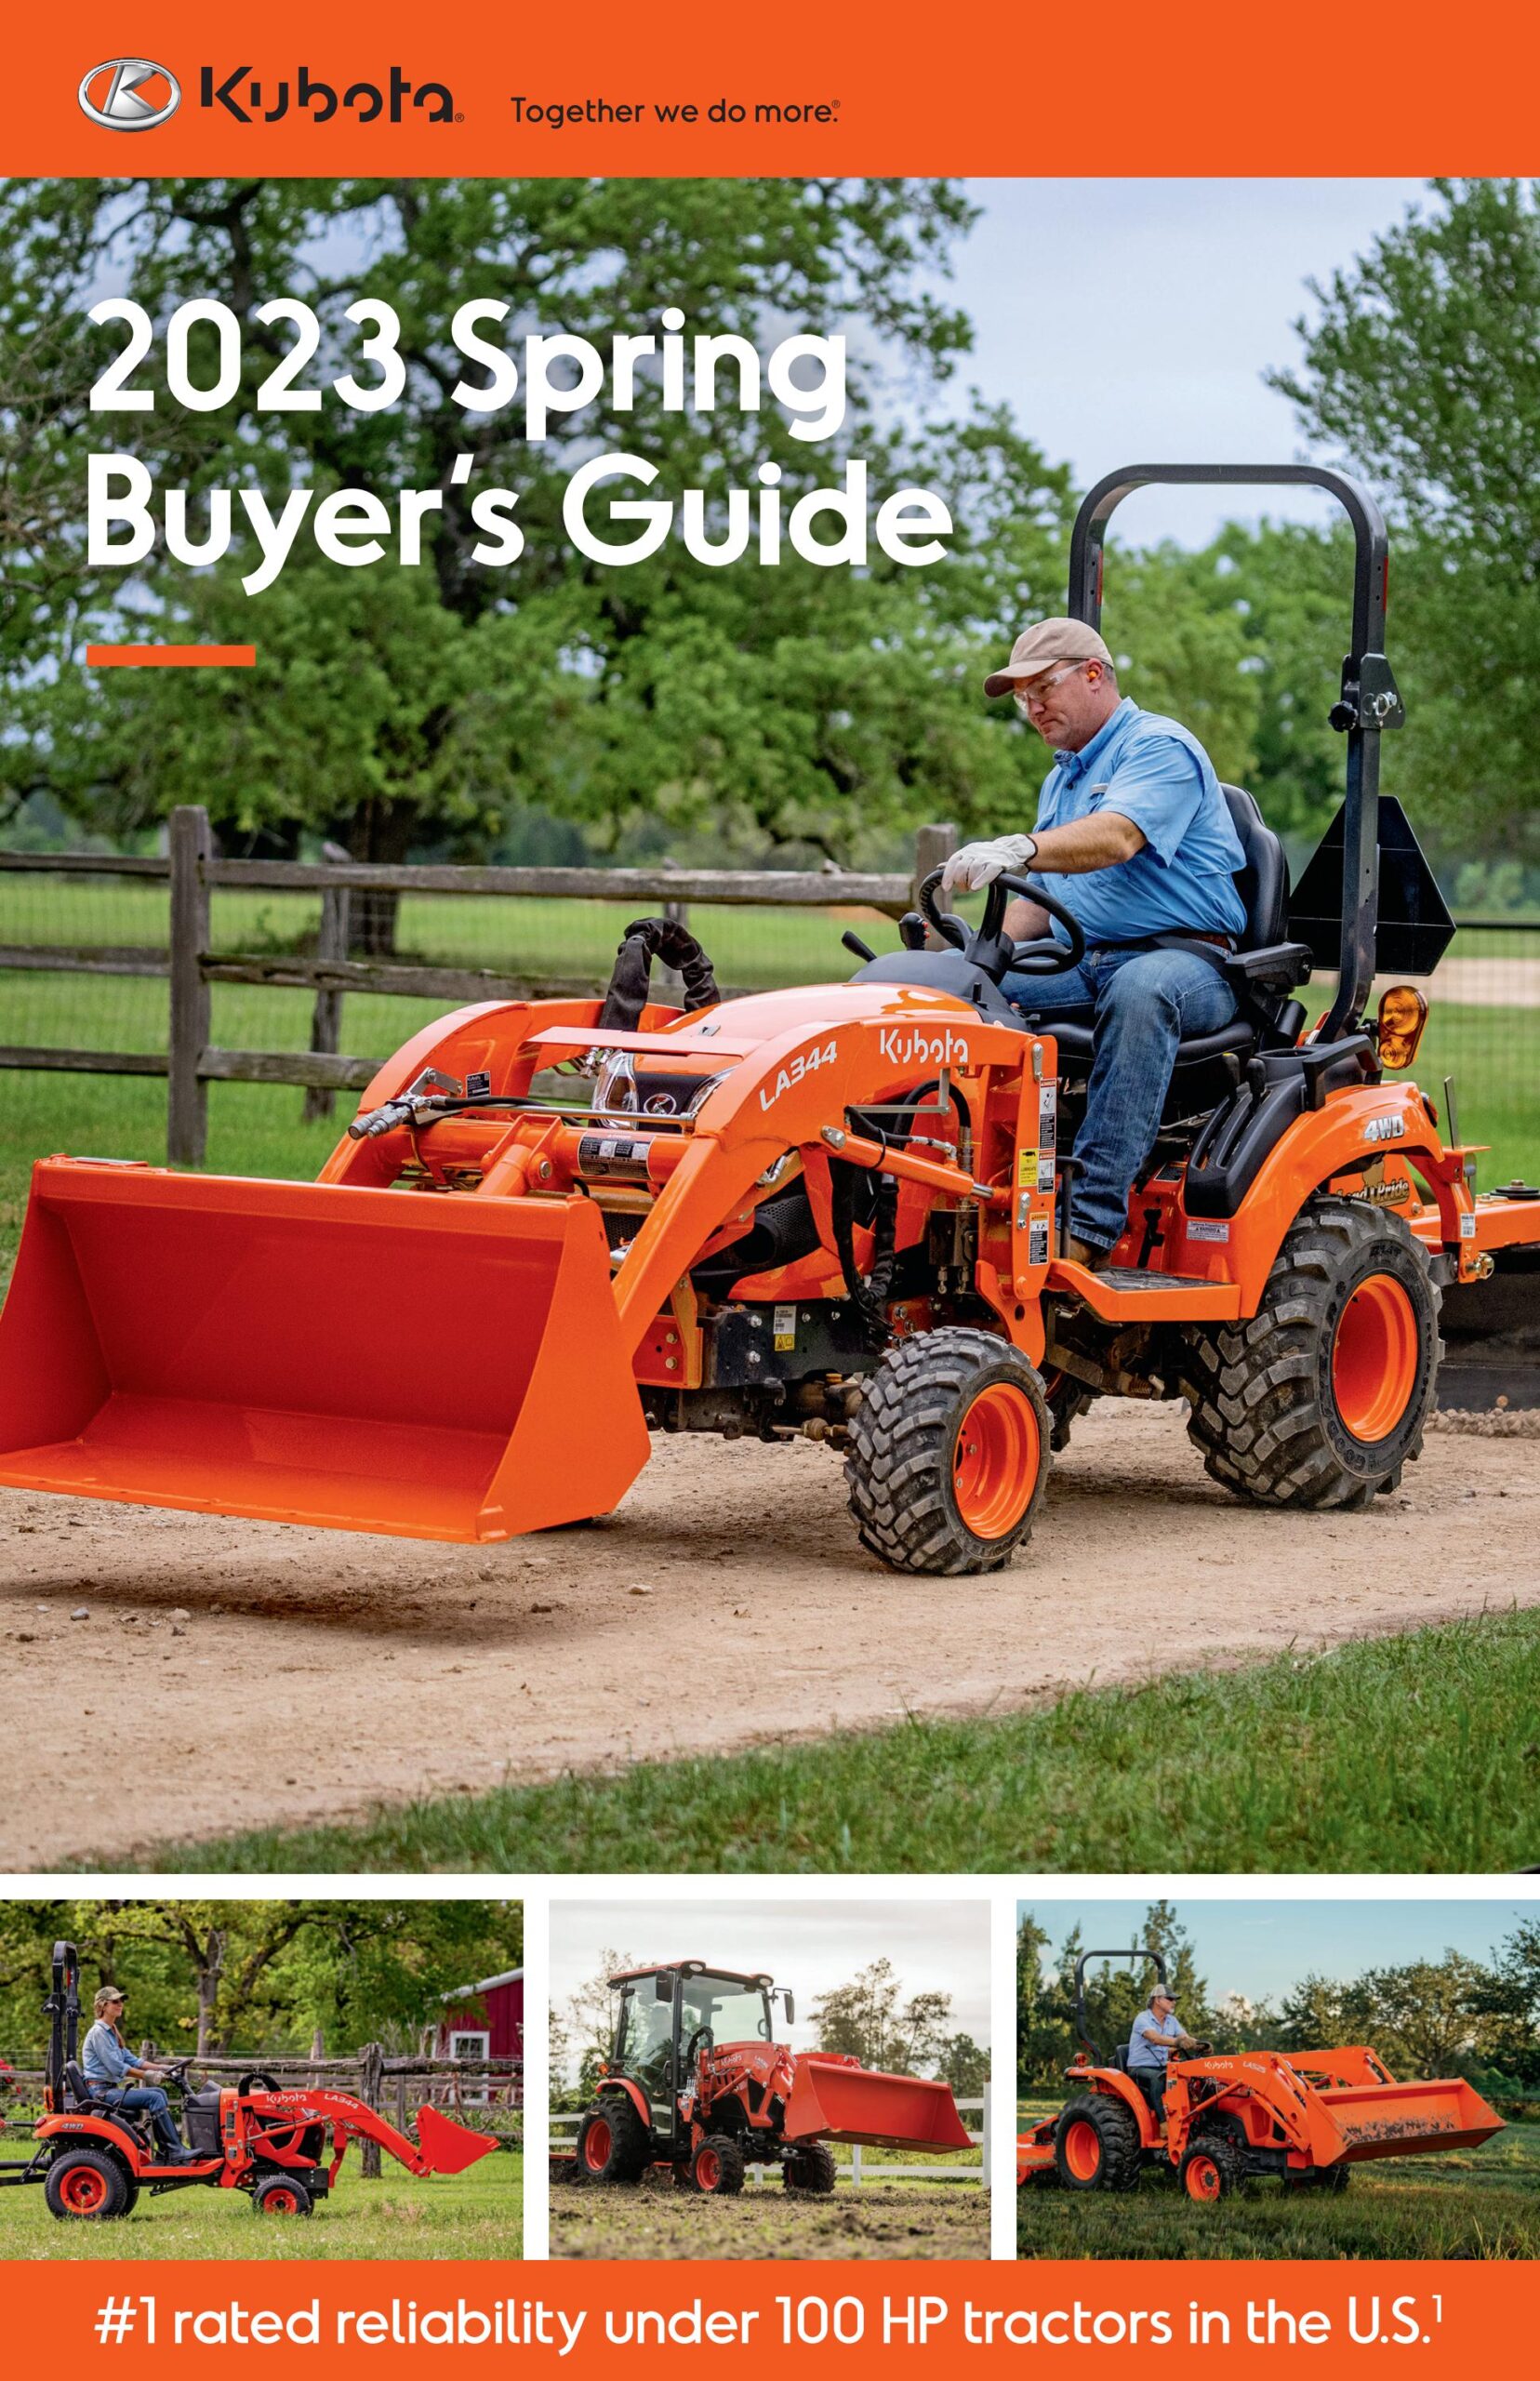 Ultimate Guide to Kubota LA526 Tractor: Specs, Features & Maintenance